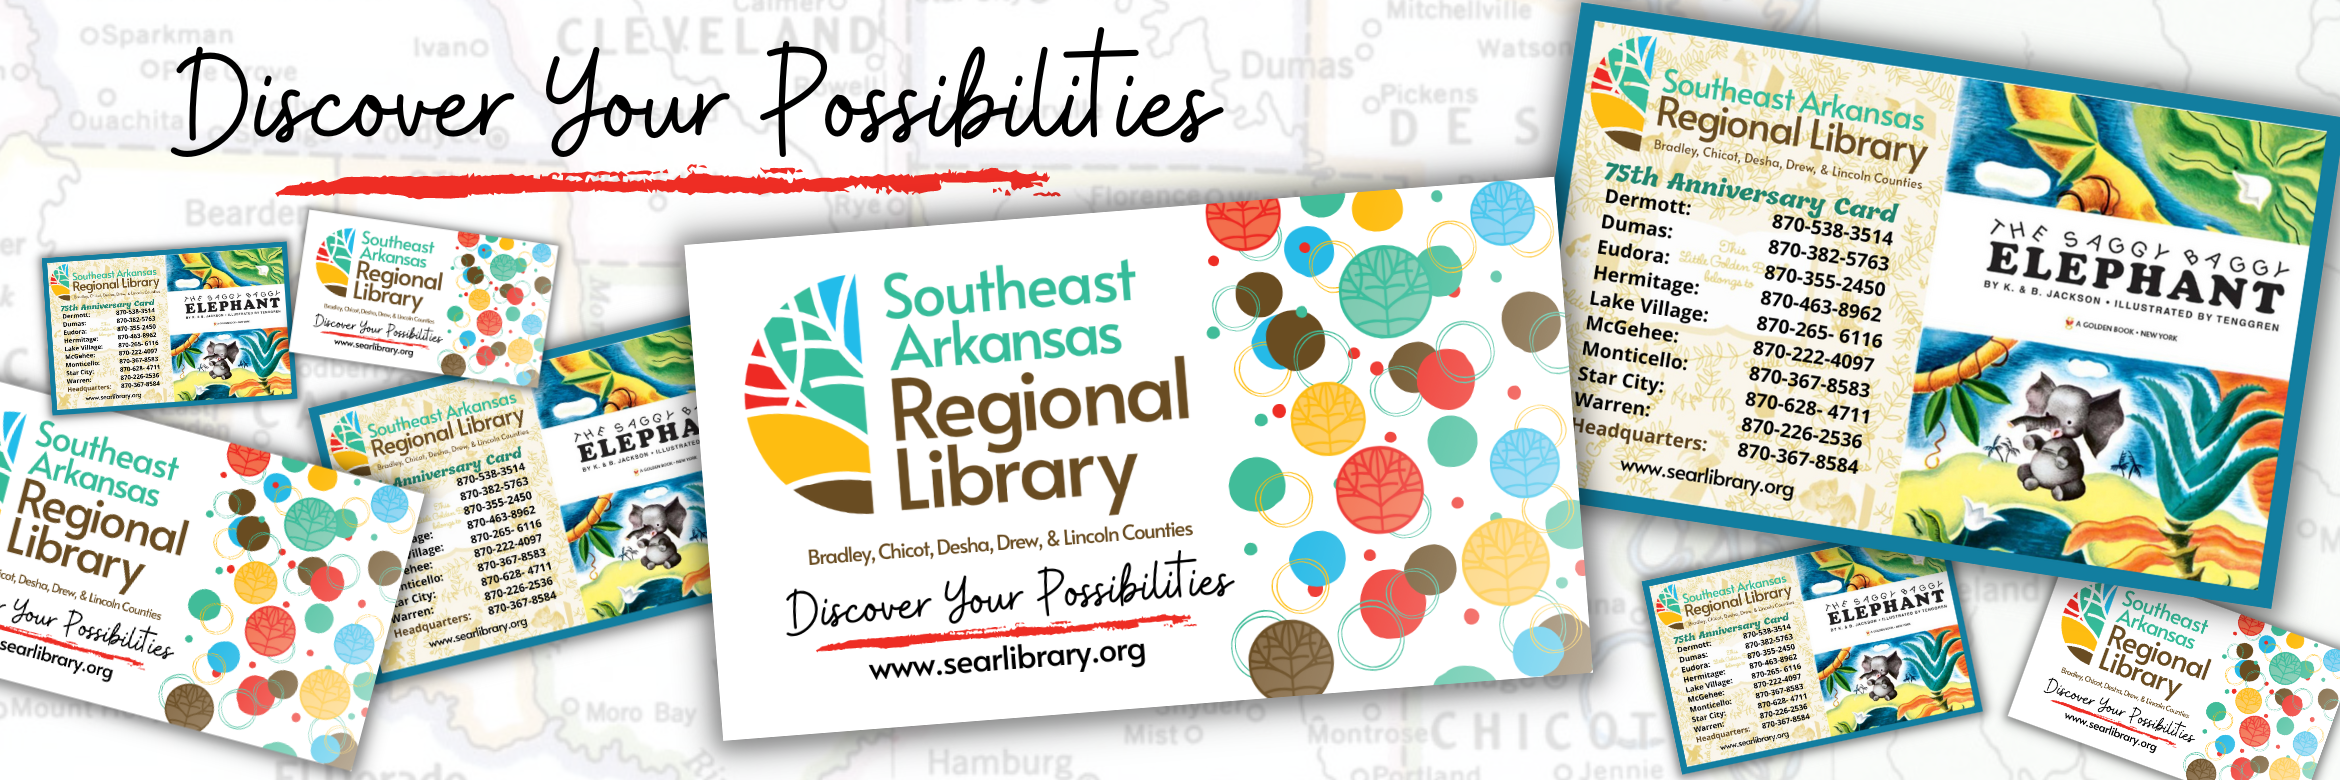 Image of Southeast Arkansas Regional Library cards